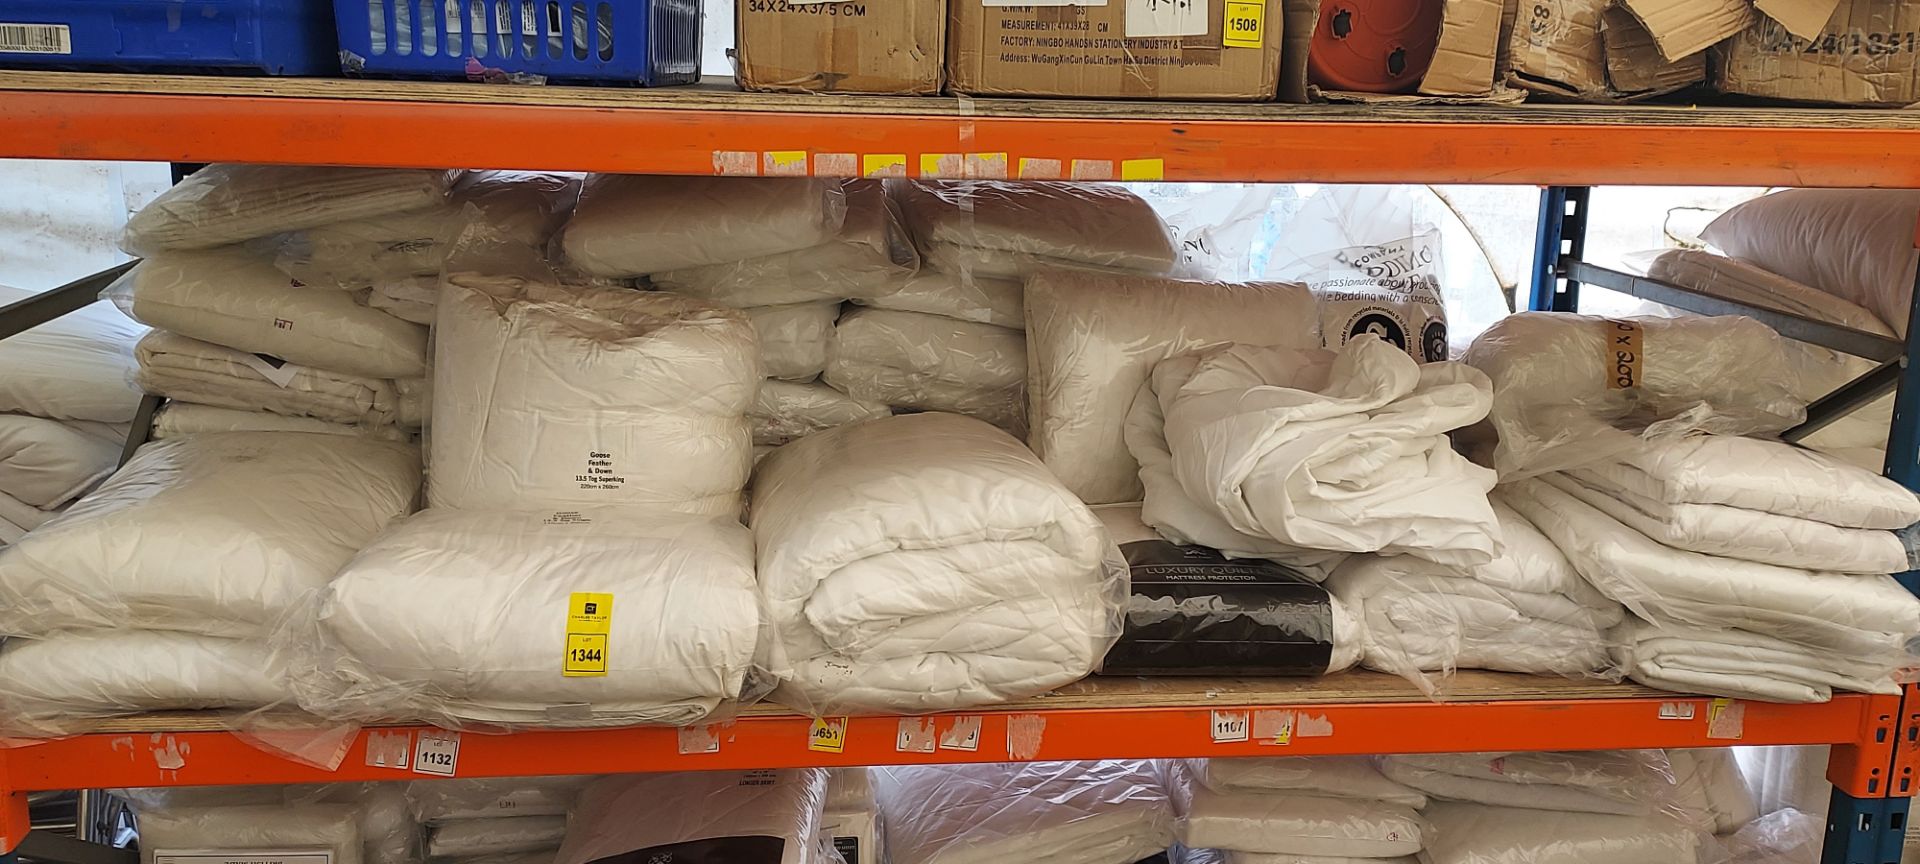 25 BRAND NEW BEDDING LOT CONTAINING GOOSE FEATHER DOWN 13.5 TOG SUPERKING DUVET- KING SIZED LUXURY